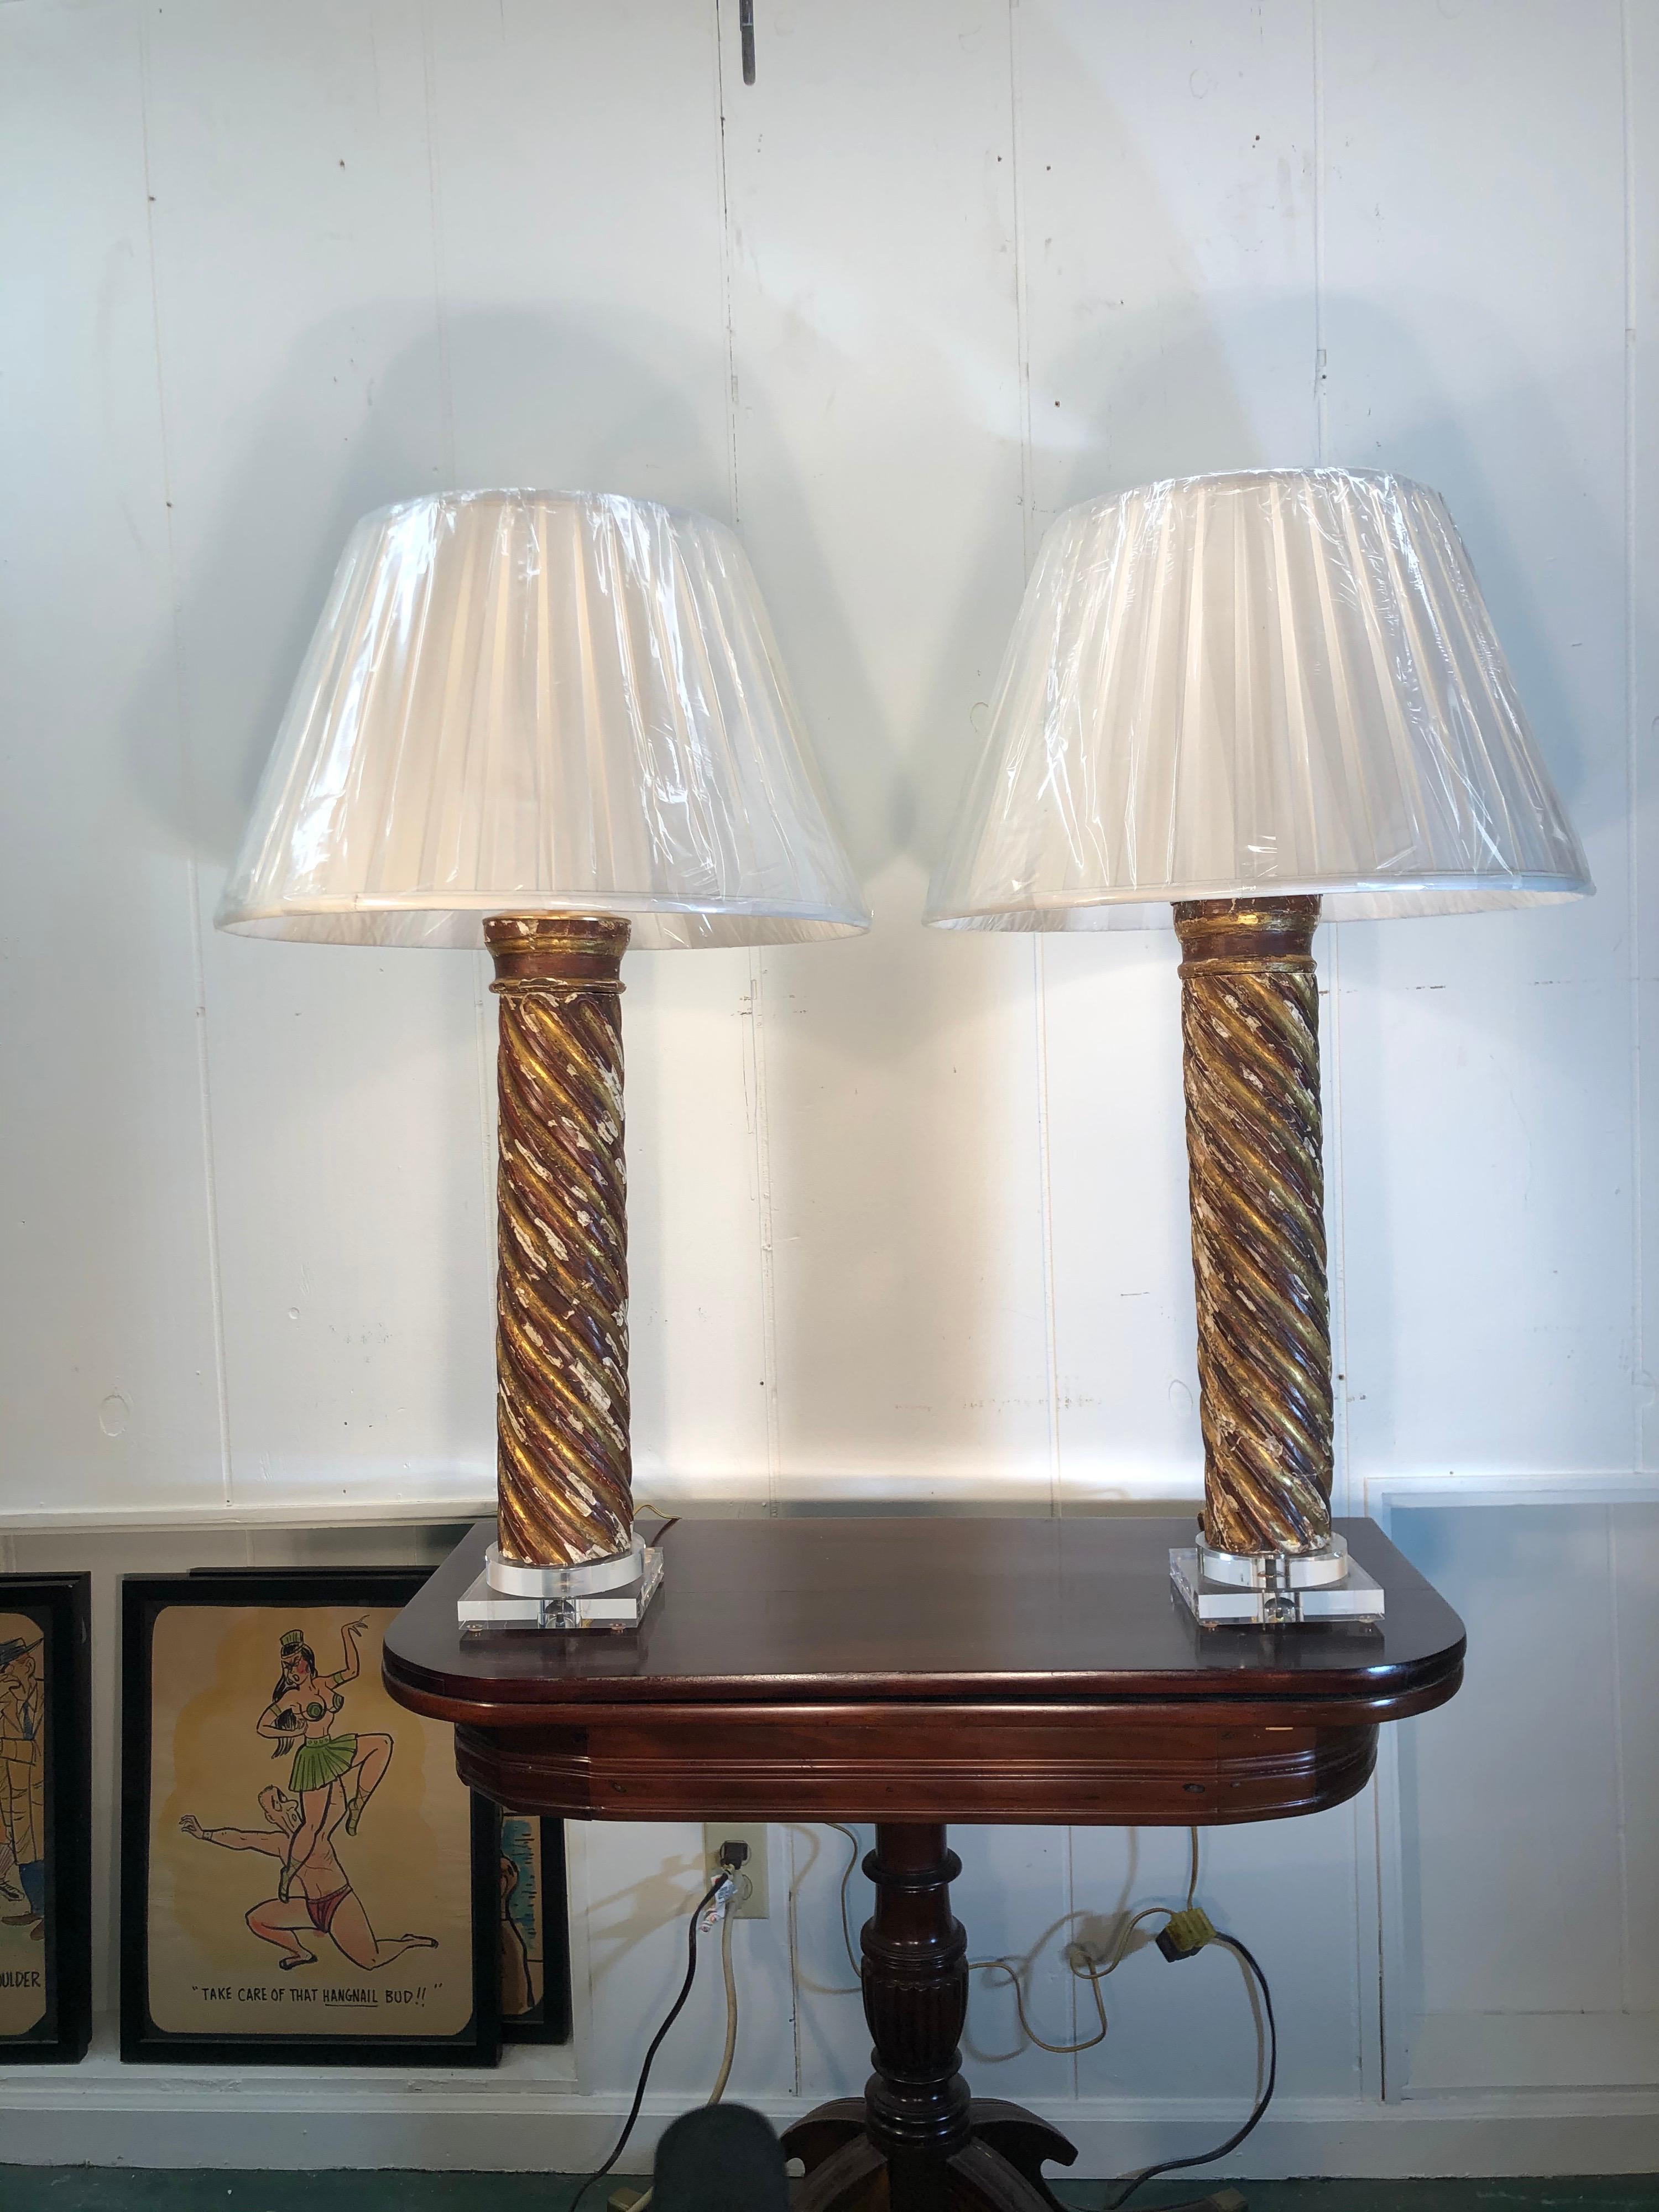 Pair of Mid-18th Century Italian Giltwood Column Lamps For Sale 7